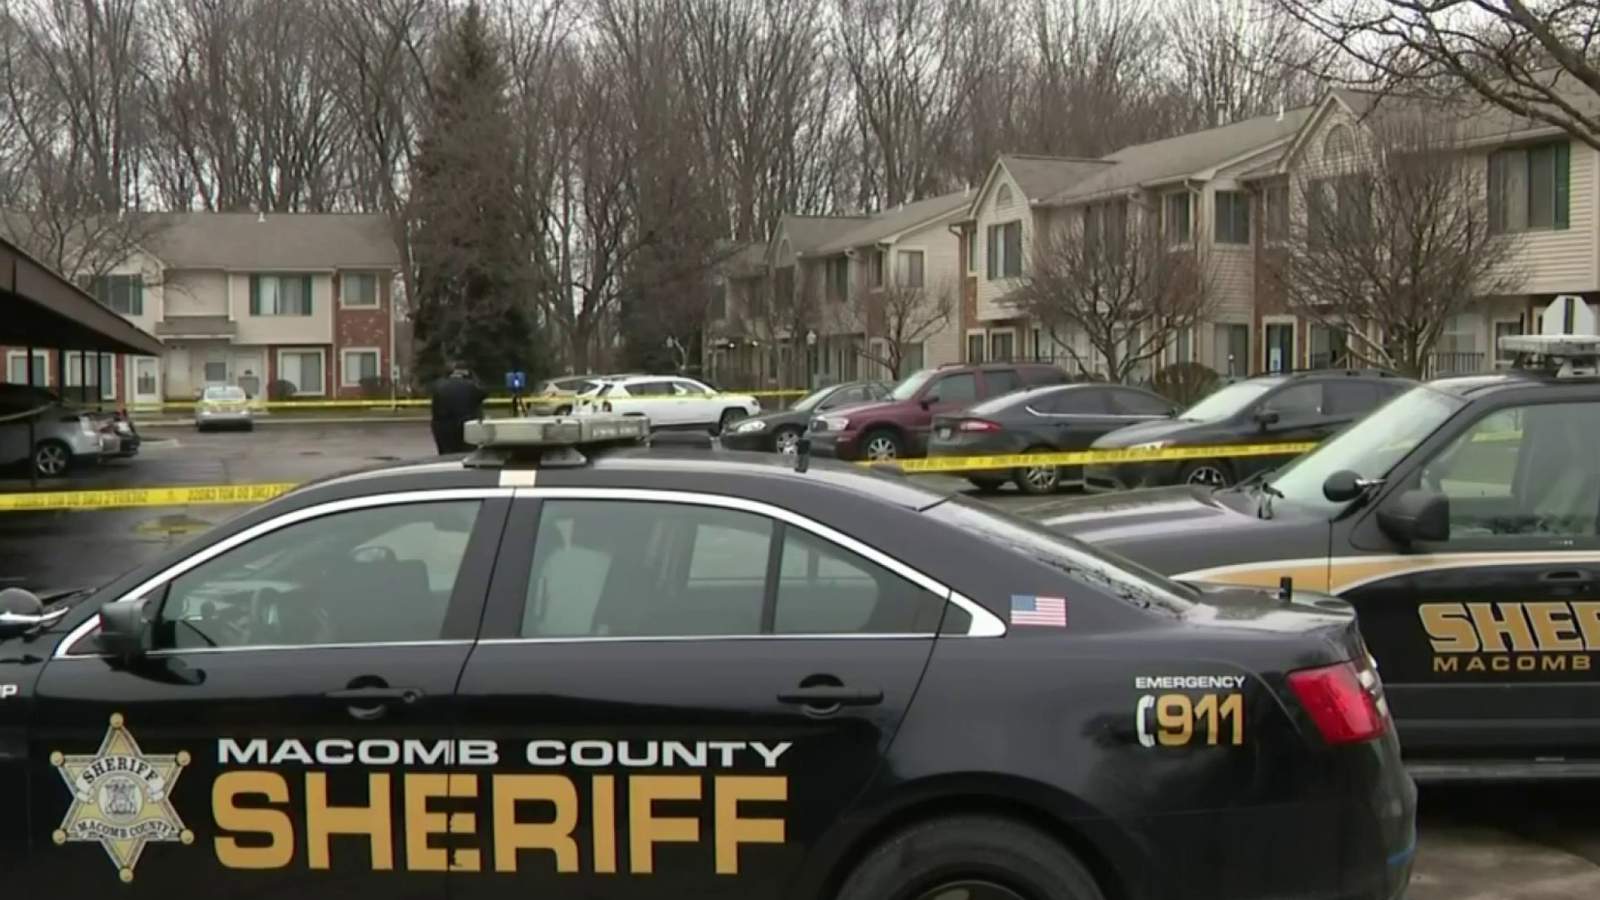 1 dead in suspected Harrison Township home invasion